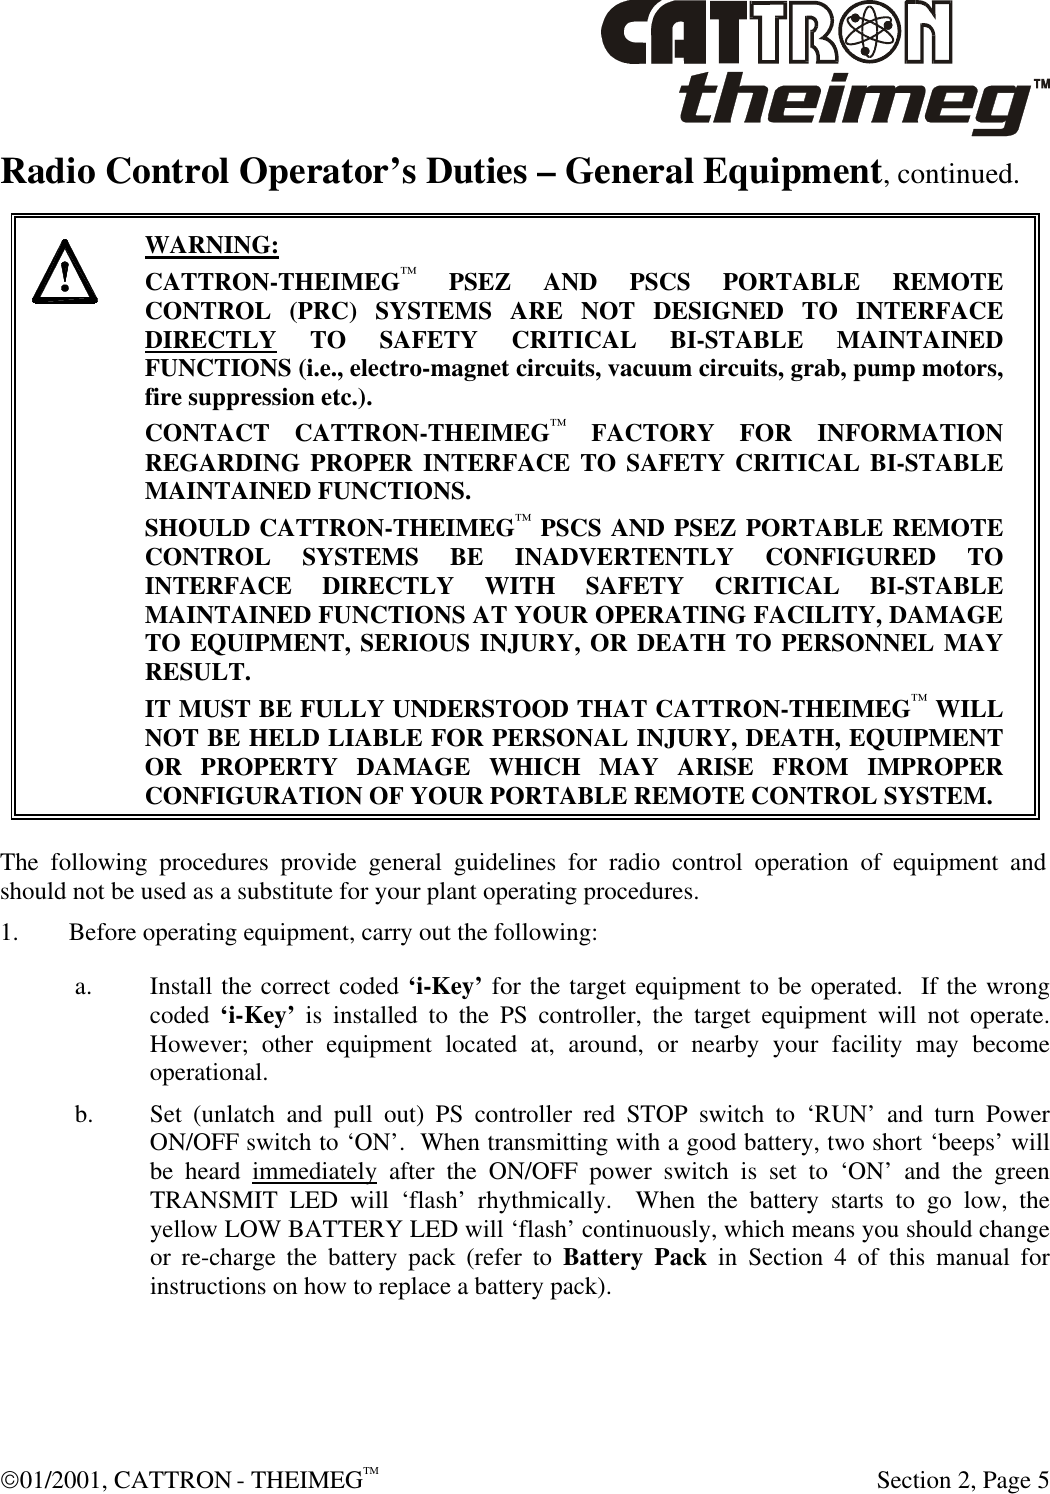  01/2001, CATTRON - THEIMEGTM  Section 2, Page 5 Radio Control Operator’s Duties – General Equipment, continued.      WARNING: CATTRON-THEIMEG™ PSEZ AND PSCS PORTABLE REMOTE CONTROL (PRC) SYSTEMS ARE NOT DESIGNED TO INTERFACE DIRECTLY TO SAFETY CRITICAL BI-STABLE MAINTAINED FUNCTIONS (i.e., electro-magnet circuits, vacuum circuits, grab, pump motors, fire suppression etc.).   CONTACT CATTRON-THEIMEG™ FACTORY FOR INFORMATION REGARDING PROPER INTERFACE TO SAFETY CRITICAL BI-STABLE MAINTAINED FUNCTIONS.  SHOULD CATTRON-THEIMEG™ PSCS AND PSEZ PORTABLE REMOTE CONTROL SYSTEMS BE INADVERTENTLY CONFIGURED TO INTERFACE DIRECTLY WITH SAFETY CRITICAL BI-STABLE MAINTAINED FUNCTIONS AT YOUR OPERATING FACILITY, DAMAGE TO EQUIPMENT, SERIOUS INJURY, OR DEATH TO PERSONNEL MAY RESULT.   IT MUST BE FULLY UNDERSTOOD THAT CATTRON-THEIMEG™ WILL NOT BE HELD LIABLE FOR PERSONAL INJURY, DEATH, EQUIPMENT OR PROPERTY DAMAGE WHICH MAY ARISE FROM IMPROPER CONFIGURATION OF YOUR PORTABLE REMOTE CONTROL SYSTEM.  The following procedures provide general guidelines for radio control operation of equipment and should not be used as a substitute for your plant operating procedures. 1. Before operating equipment, carry out the following: a. Install the correct coded ‘i-Key’ for the target equipment to be operated.  If the wrong coded ‘i-Key’ is installed to the PS controller, the target equipment will not operate.  However; other equipment located at, around, or nearby your facility may become operational. b. Set (unlatch and pull out) PS controller red STOP switch to ‘RUN’ and turn Power ON/OFF switch to ‘ON’.  When transmitting with a good battery, two short ‘beeps’ will be heard immediately after the ON/OFF power switch is set to ‘ON’ and the green TRANSMIT LED will ‘flash’ rhythmically.  When the battery starts to go low, the yellow LOW BATTERY LED will ‘flash’ continuously, which means you should change or re-charge the battery pack (refer to Battery Pack in Section 4 of this manual for instructions on how to replace a battery pack). 